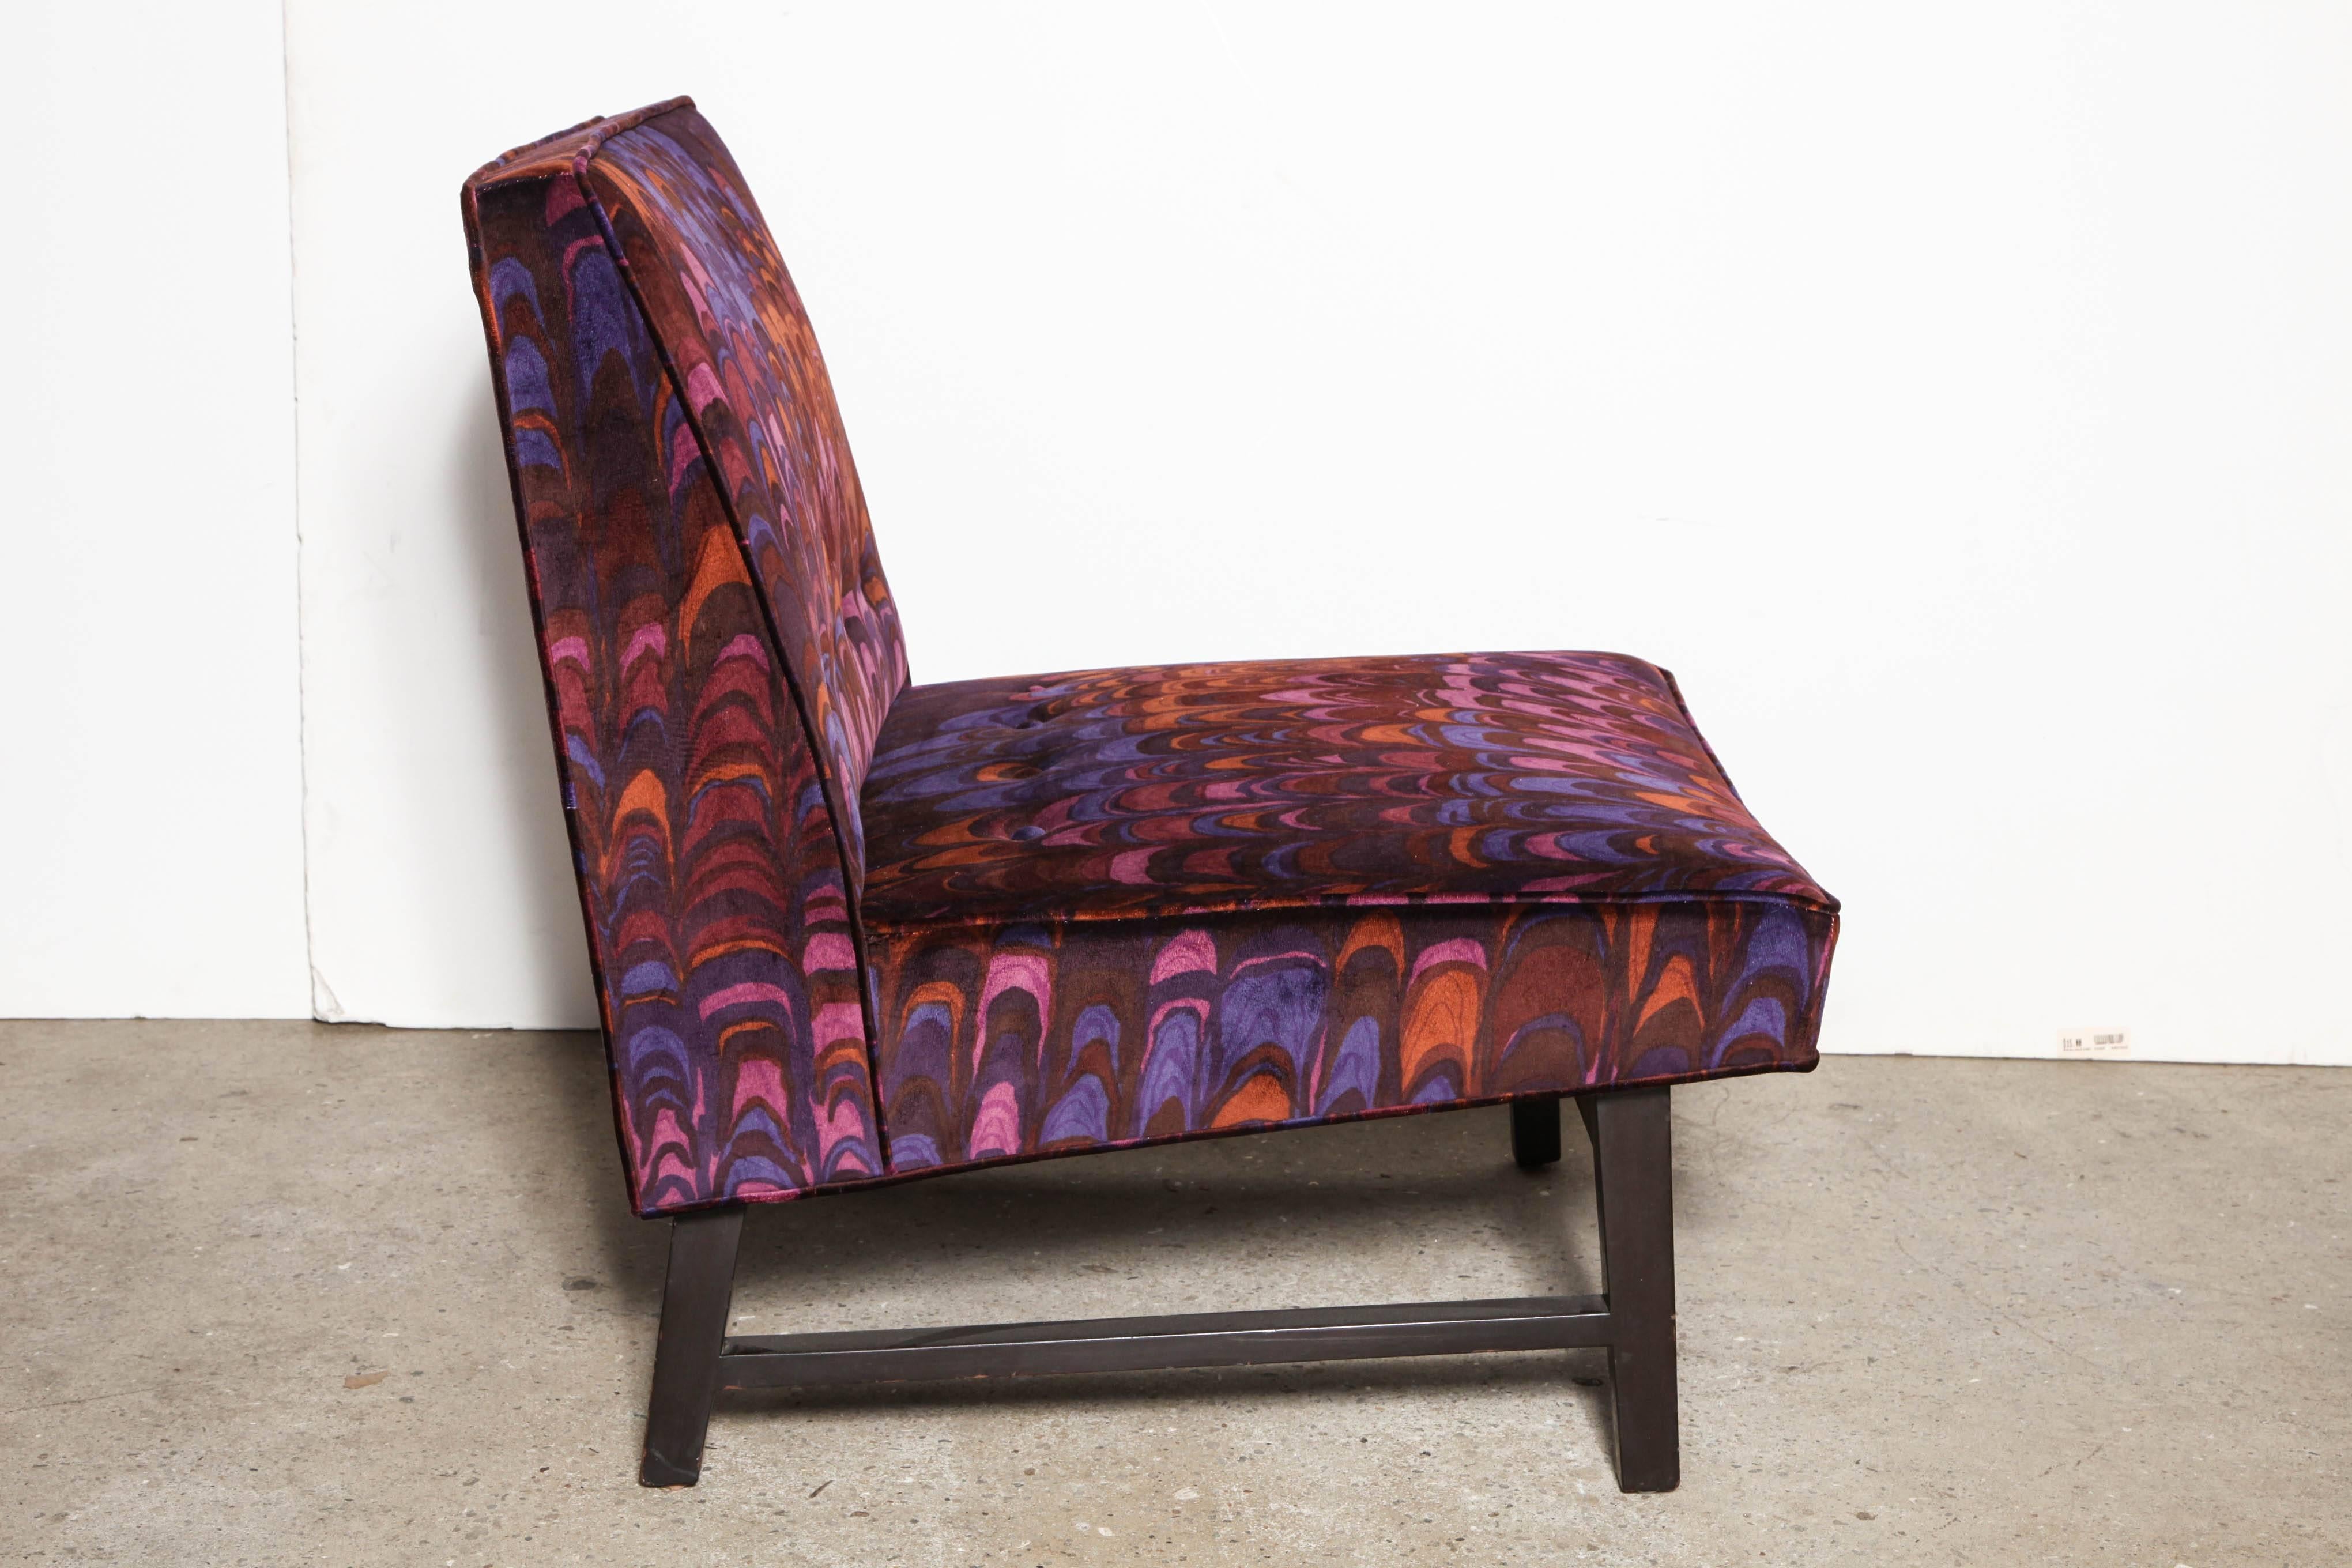 Classic American Mid Century Edward Wormley for Dunbar Mod Slipper Chair. Featuring a Black ebonized Mahogany frame and sloped seat upholstered in Mod Jack Lenore Larsen fabric in shades of Purple, Hot Pink, Copper, Brown, Violet and Magenta. Wide.